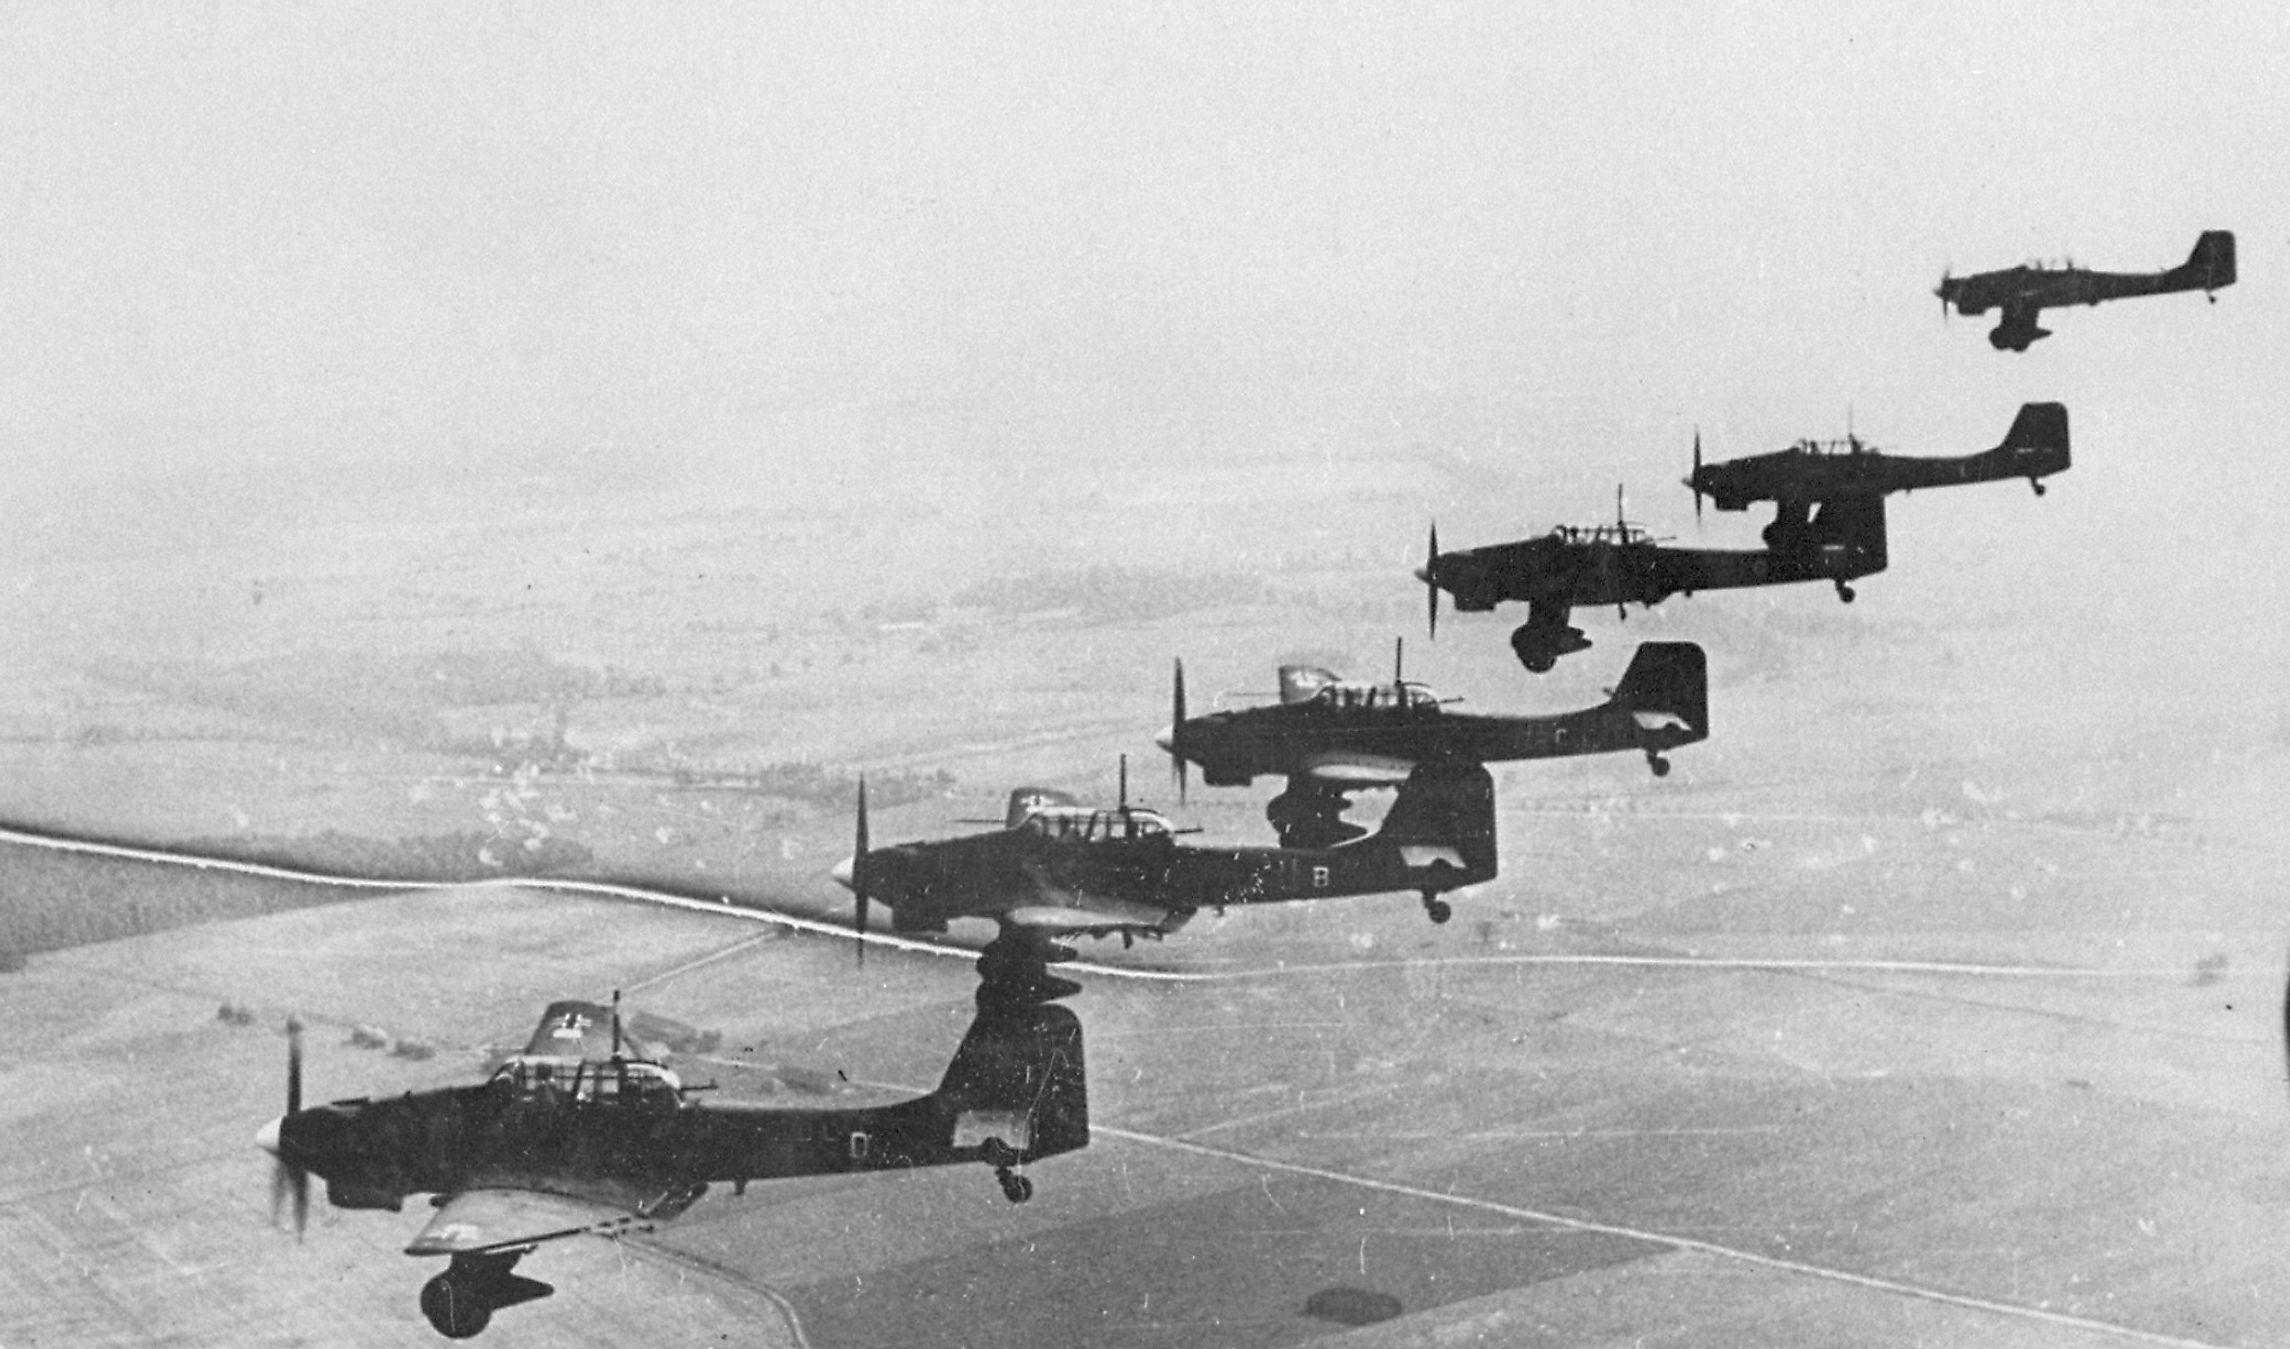 The Ju 87 "Stuka" dive-bomber was used in blitzkrieg operations.